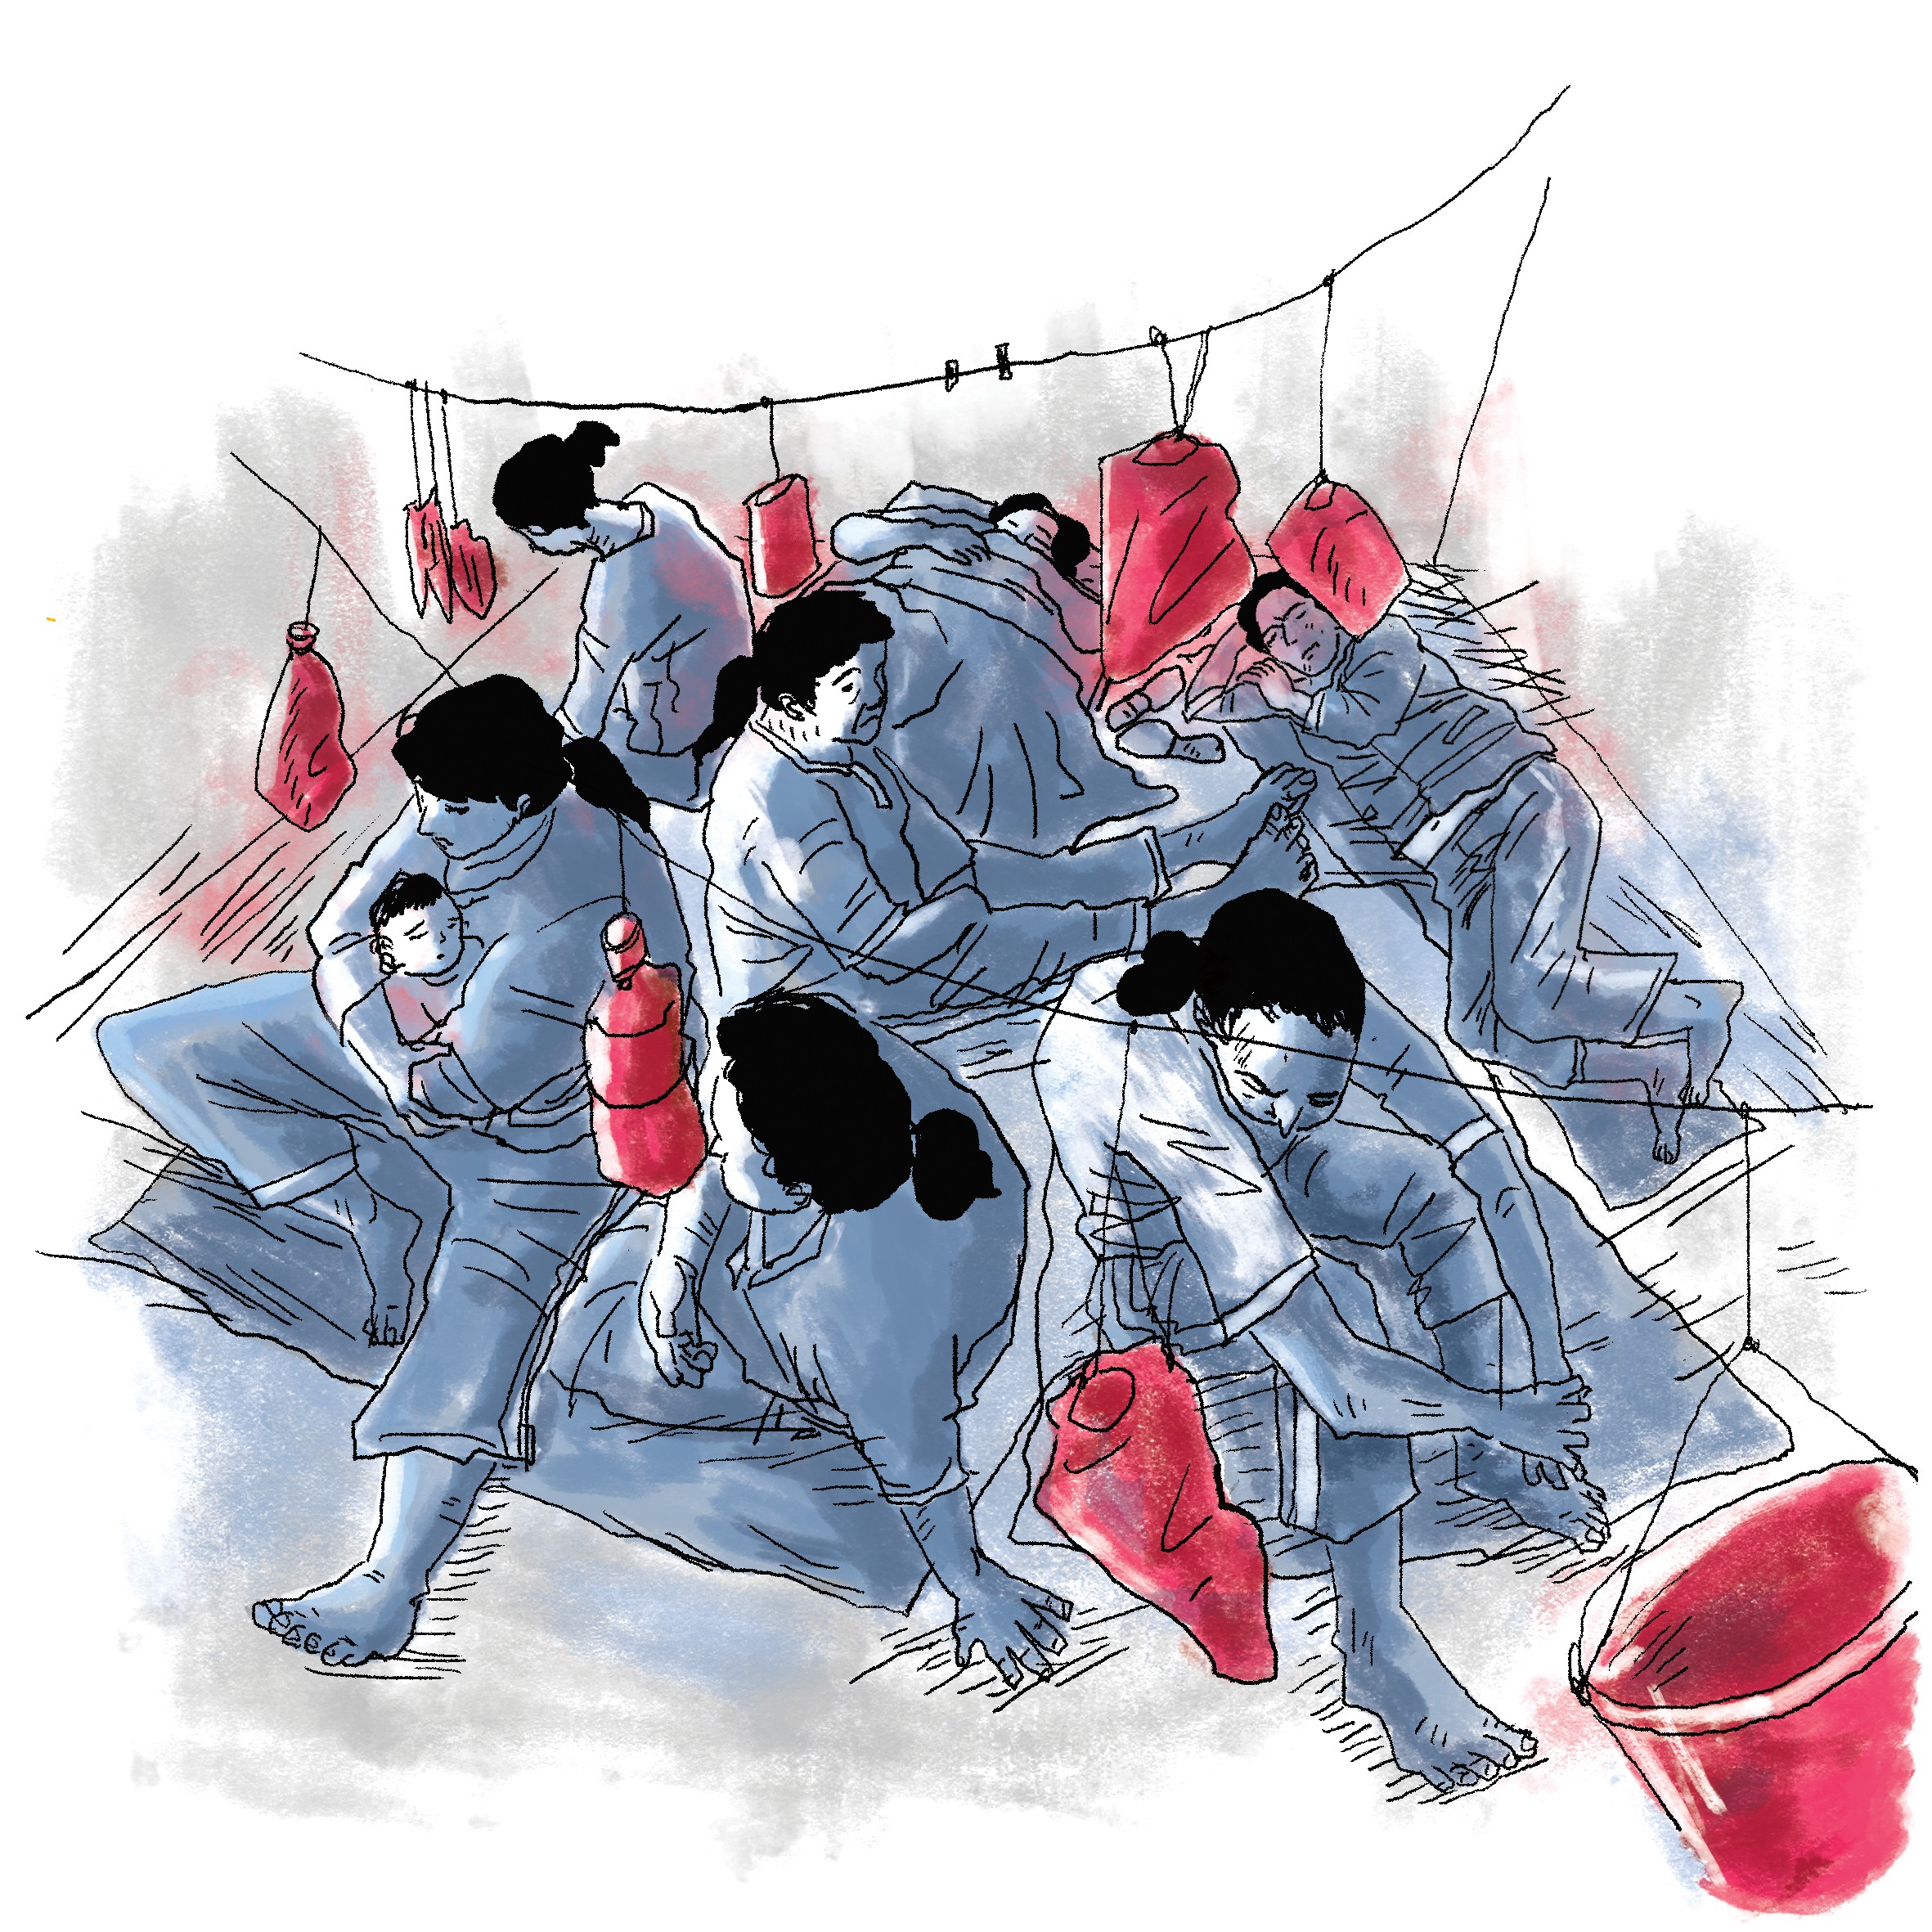 The number of women locked up in Cambodia’s prisons has been described as alarming. Illustration: Brian Wang